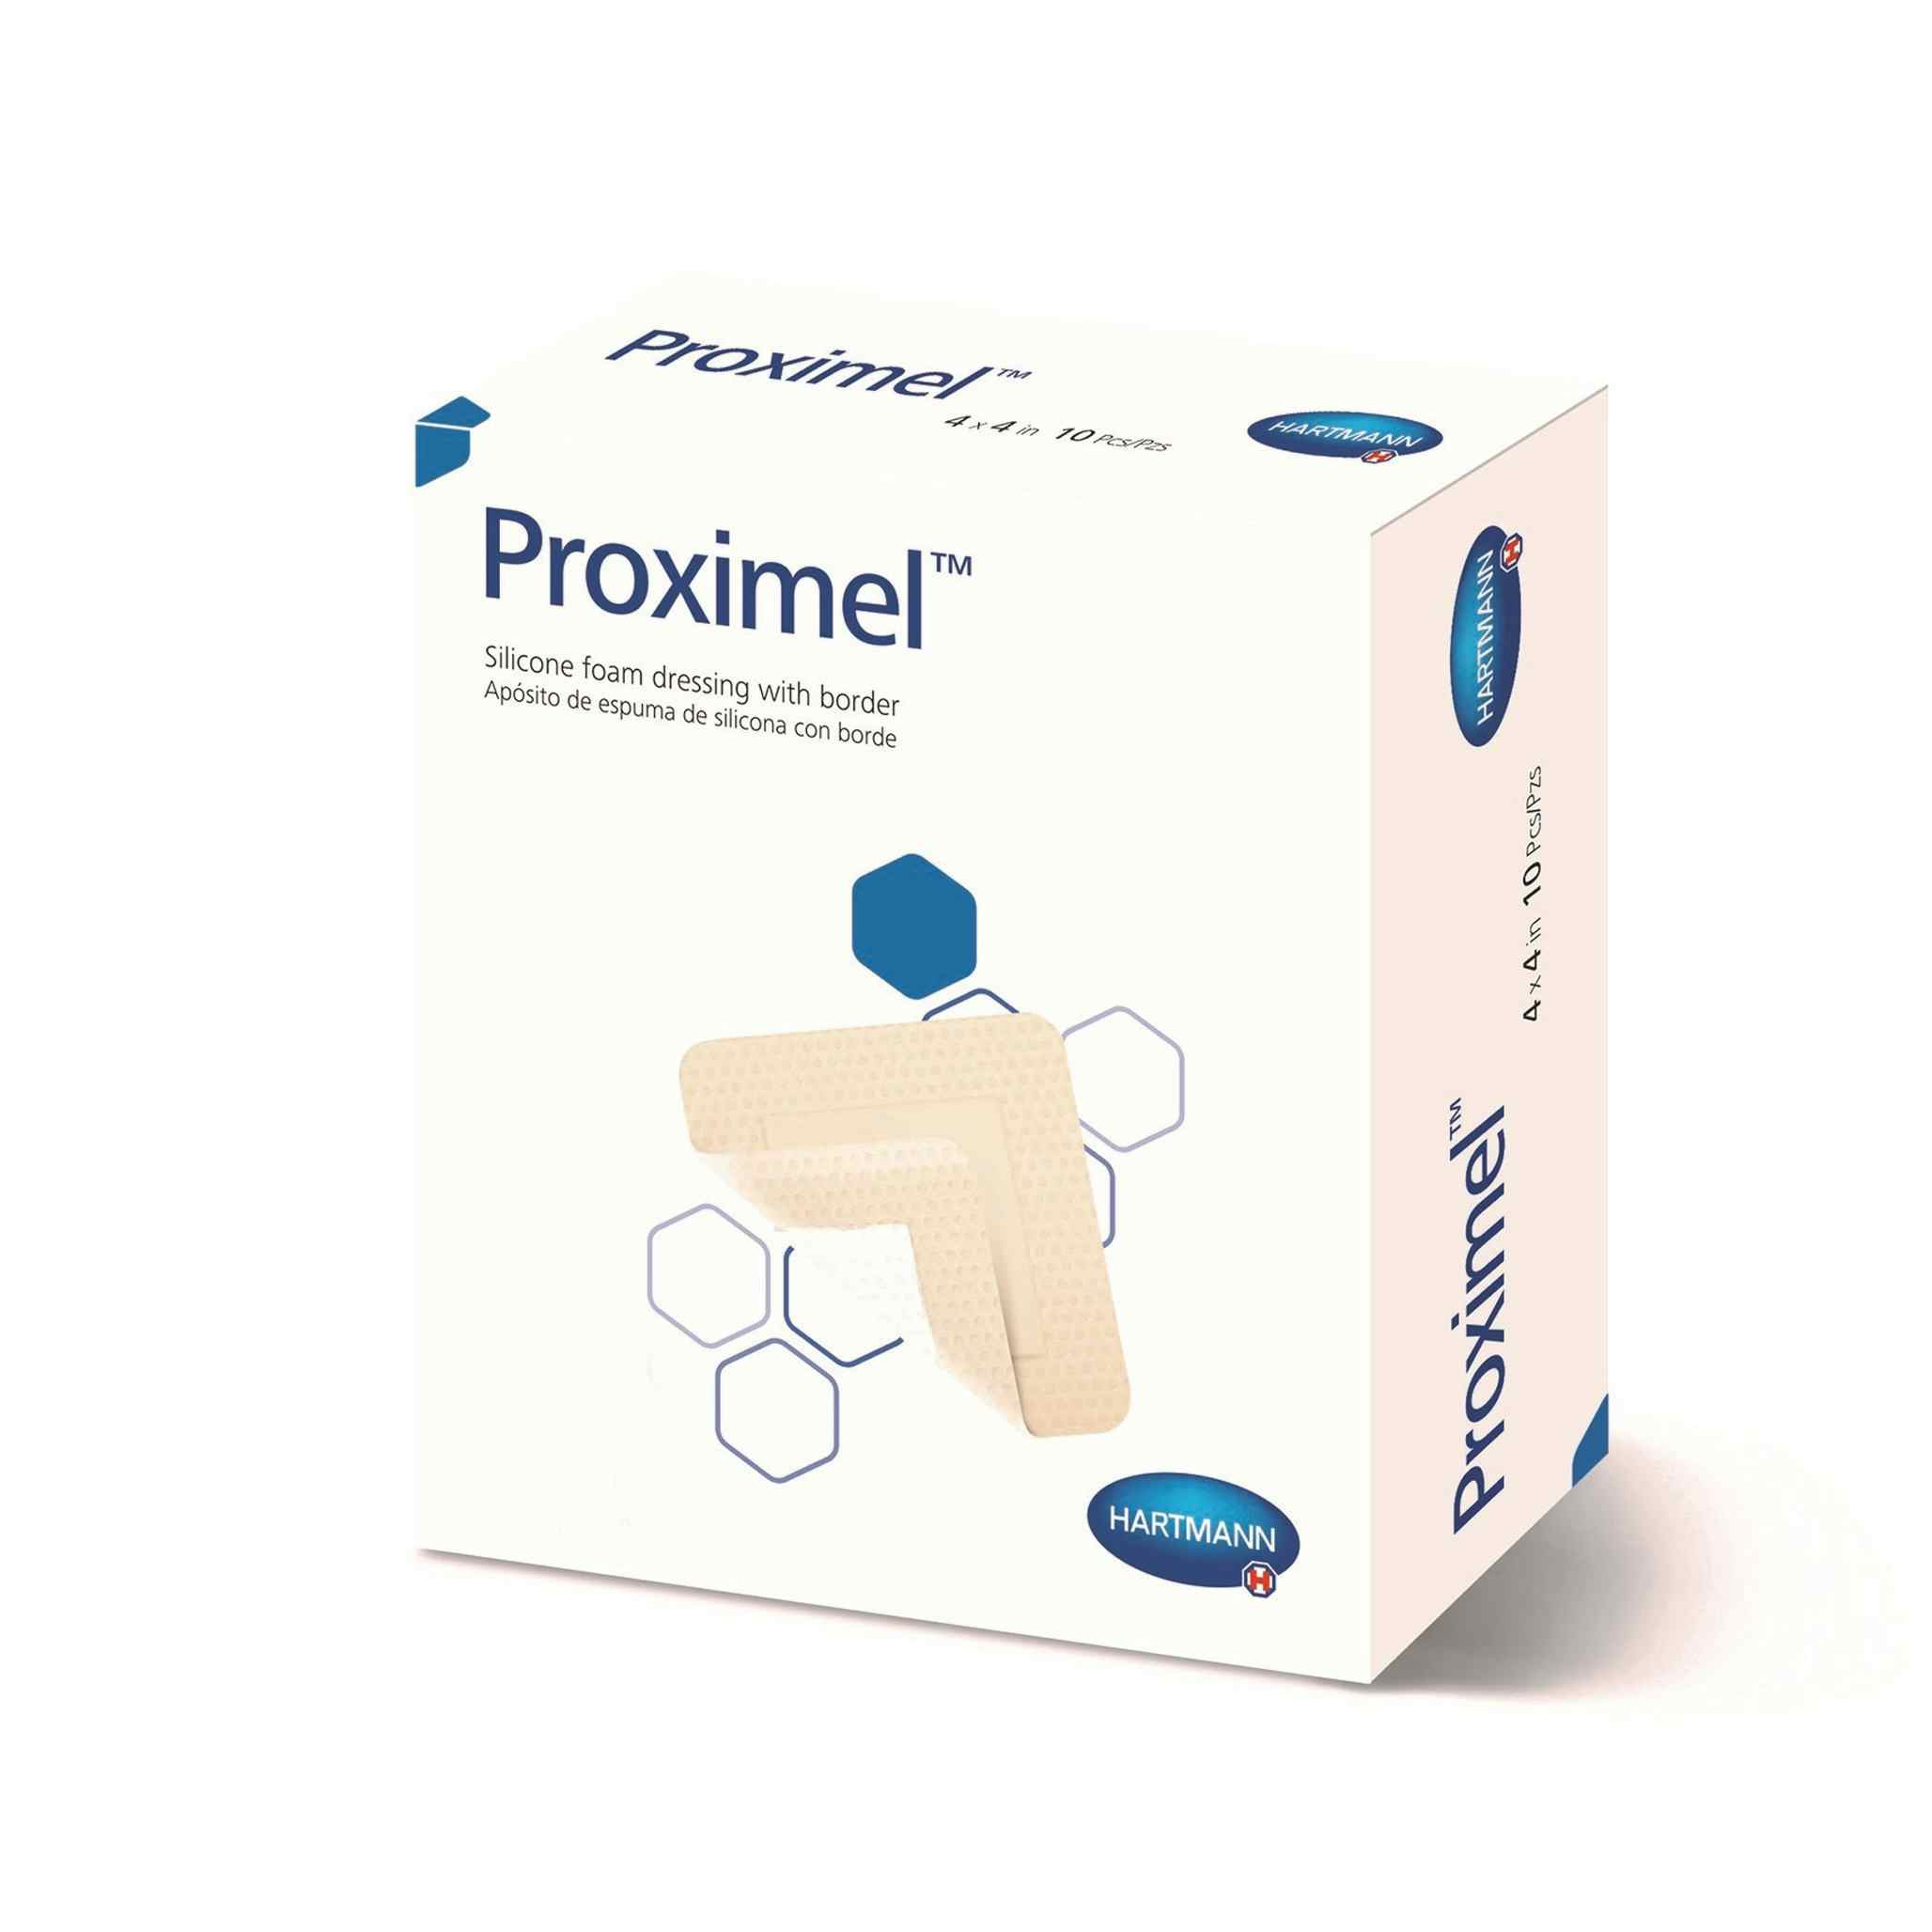 Proximel Silicone Foam Dressings with Border, 6 X 6", 14400000, Box of 5